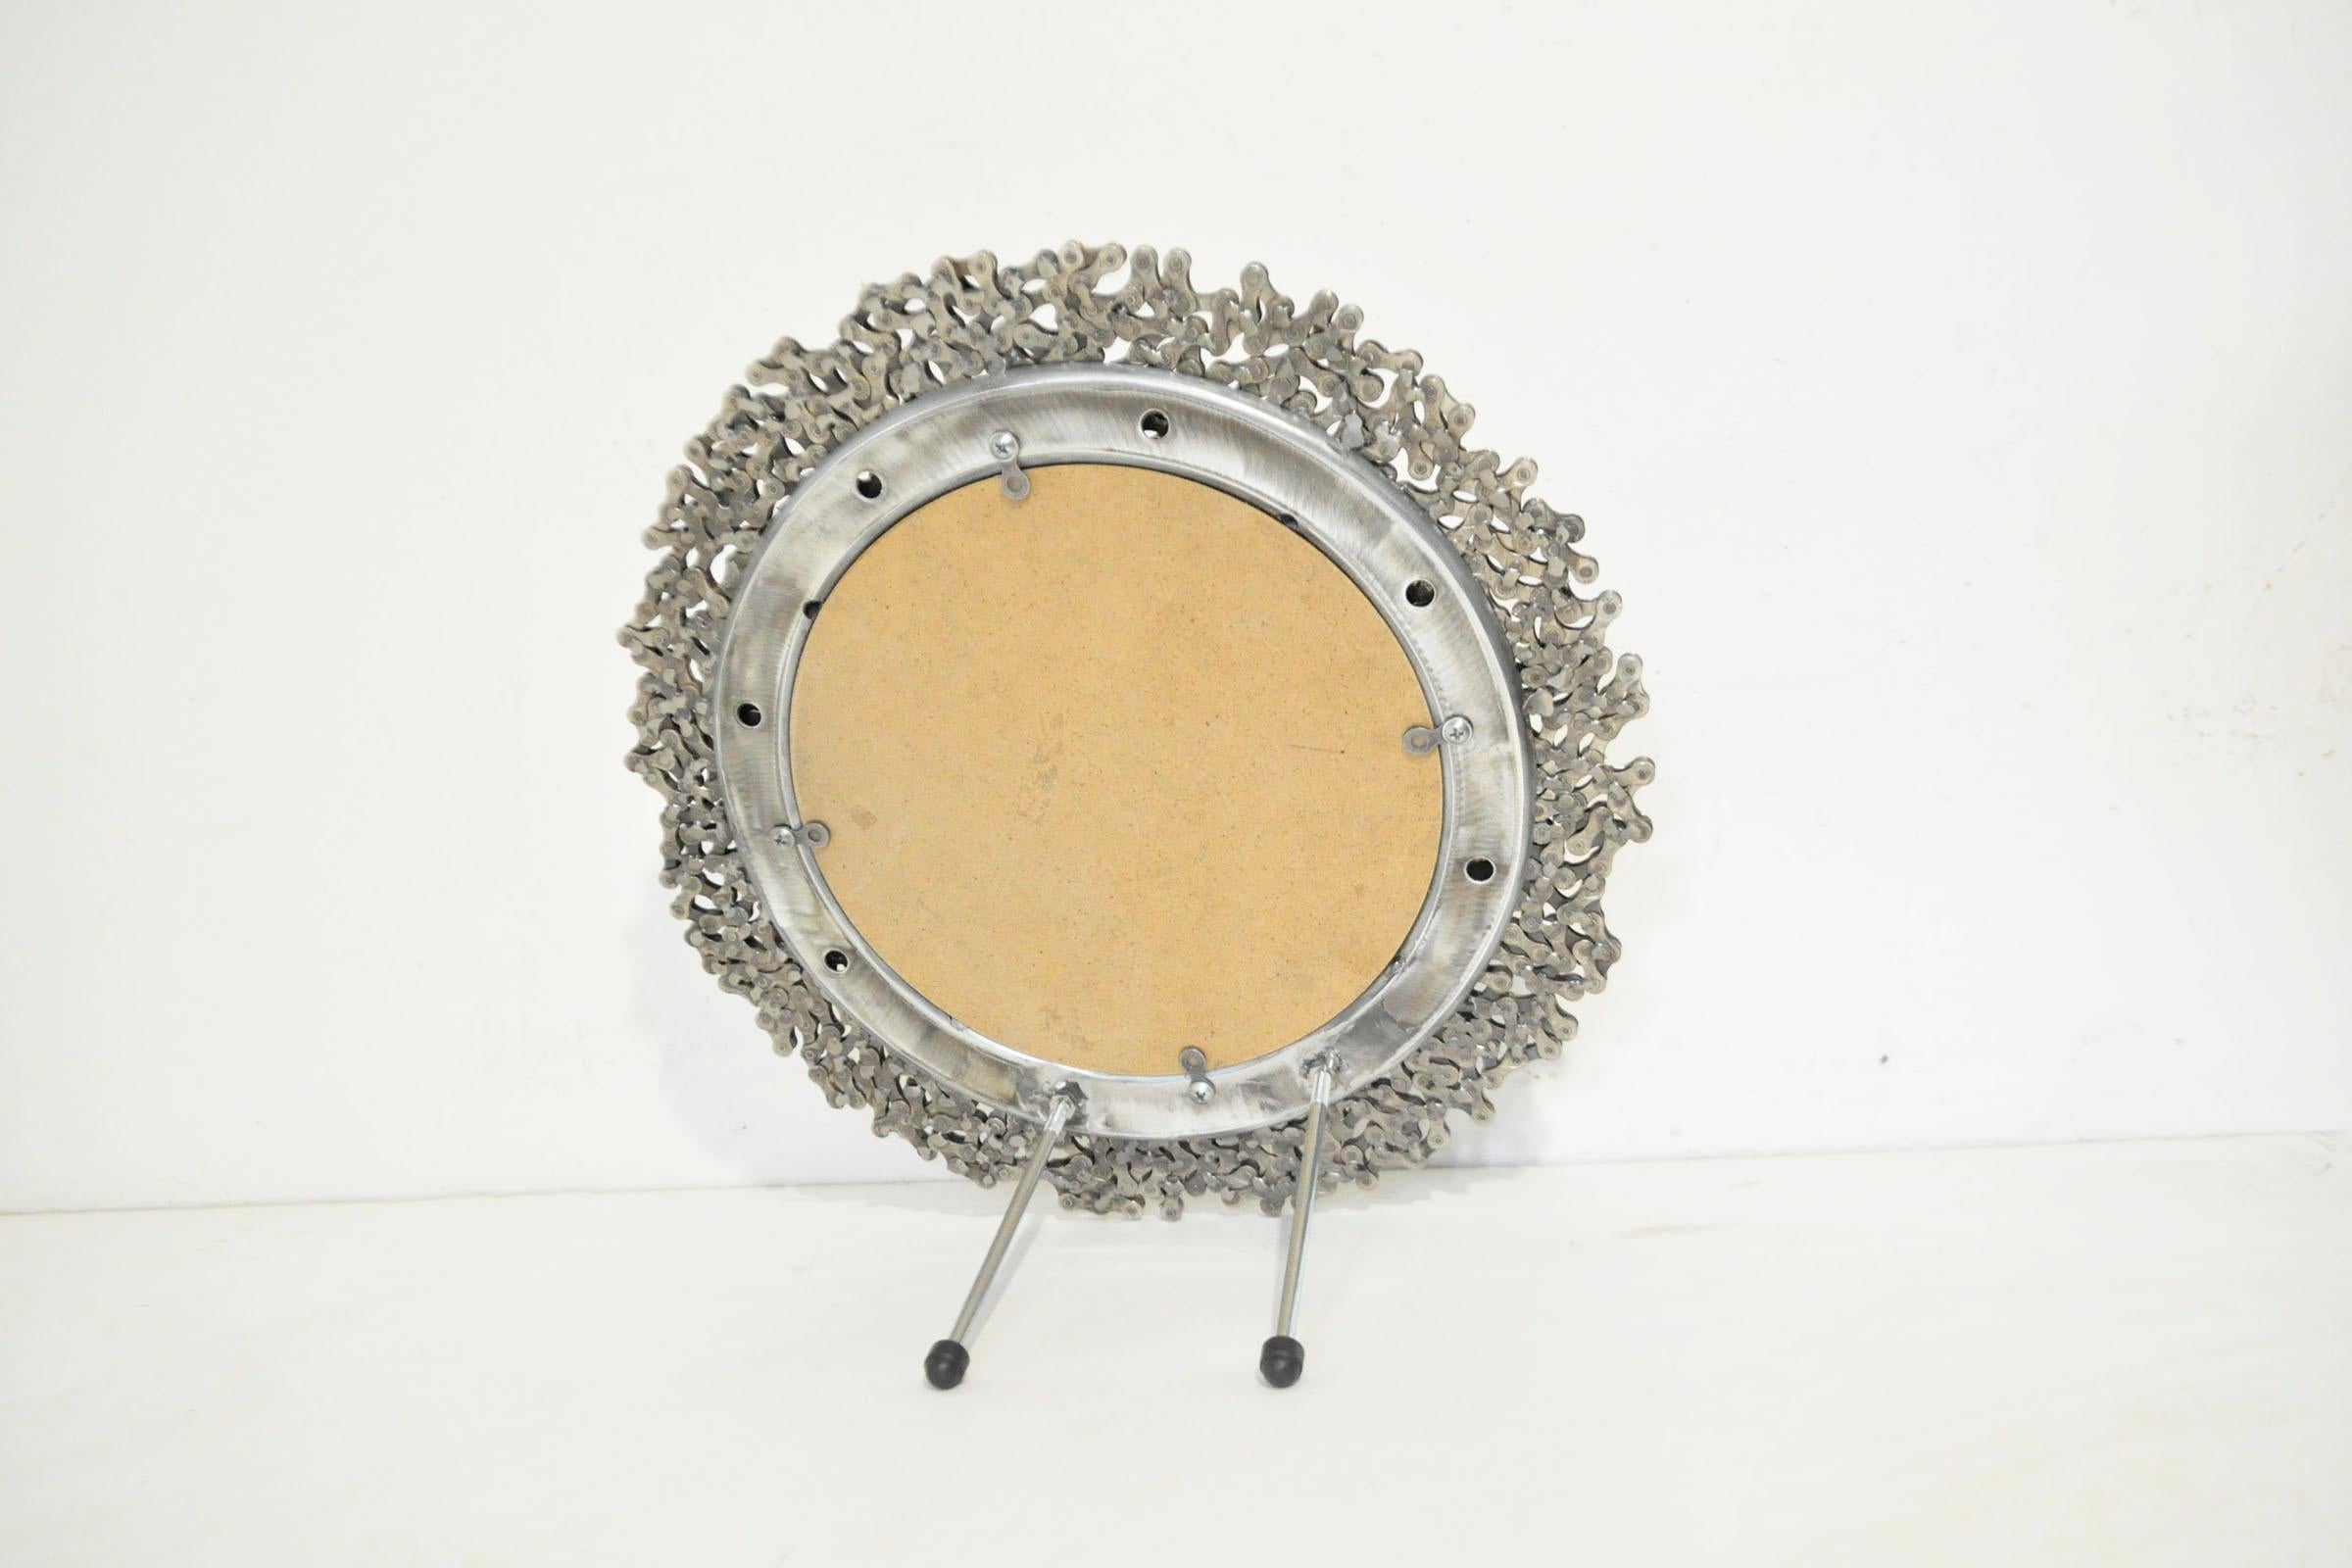 Hand-Crafted Round Curly Silver Mirror from Bicycle Chain